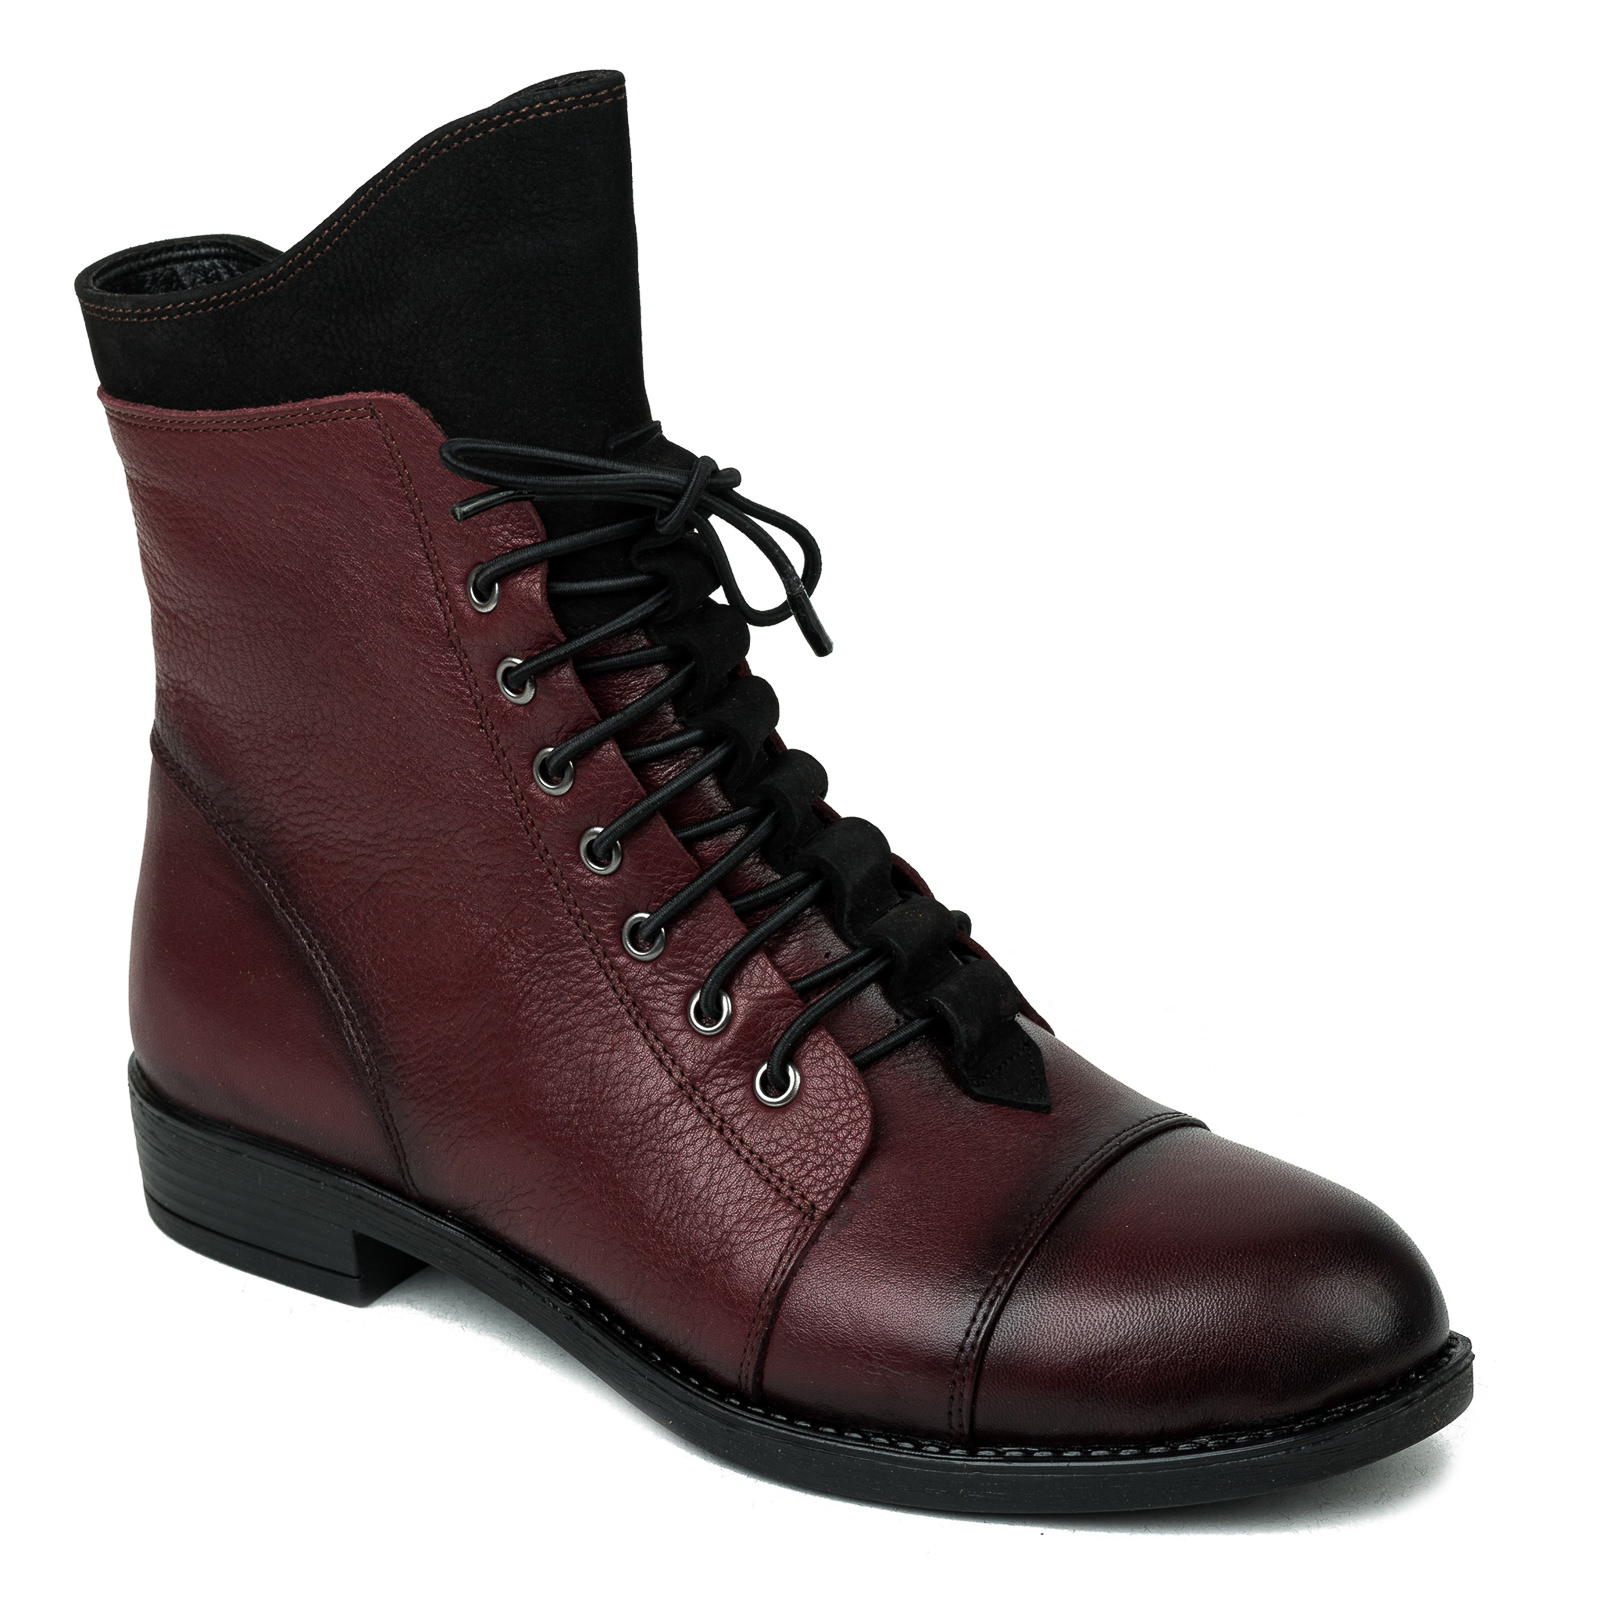 Leather booties B245 - WINE RED